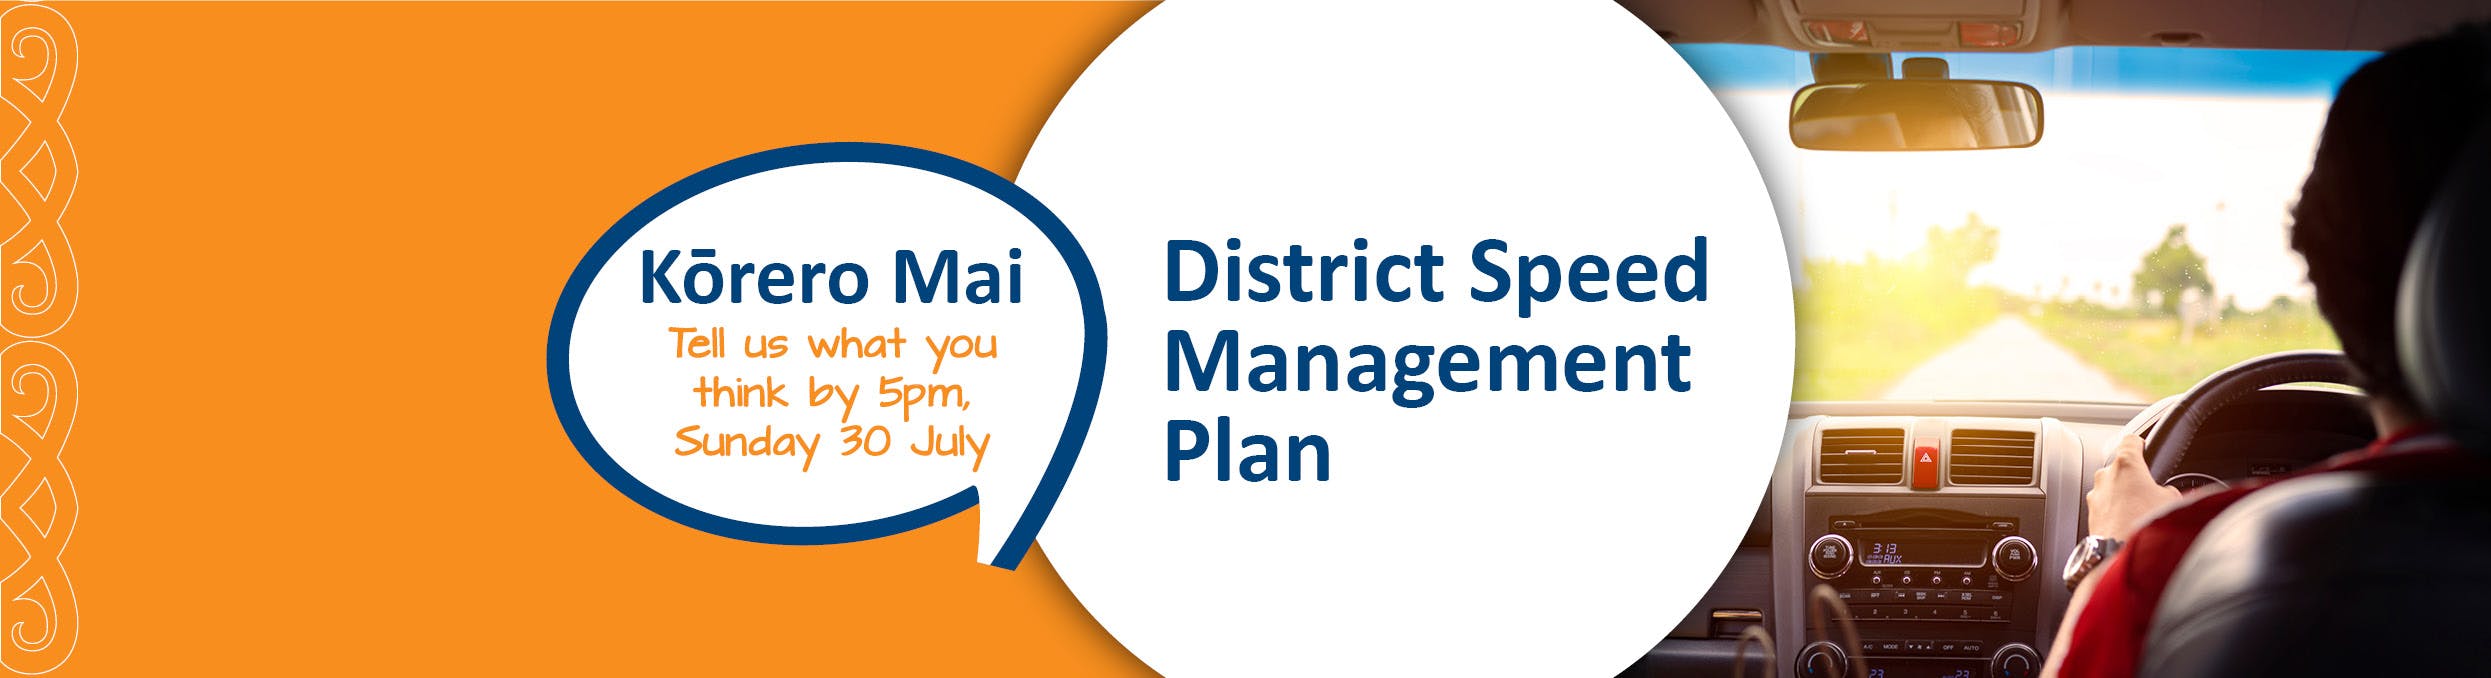 Tell us what you think on the District Speed Management Plan